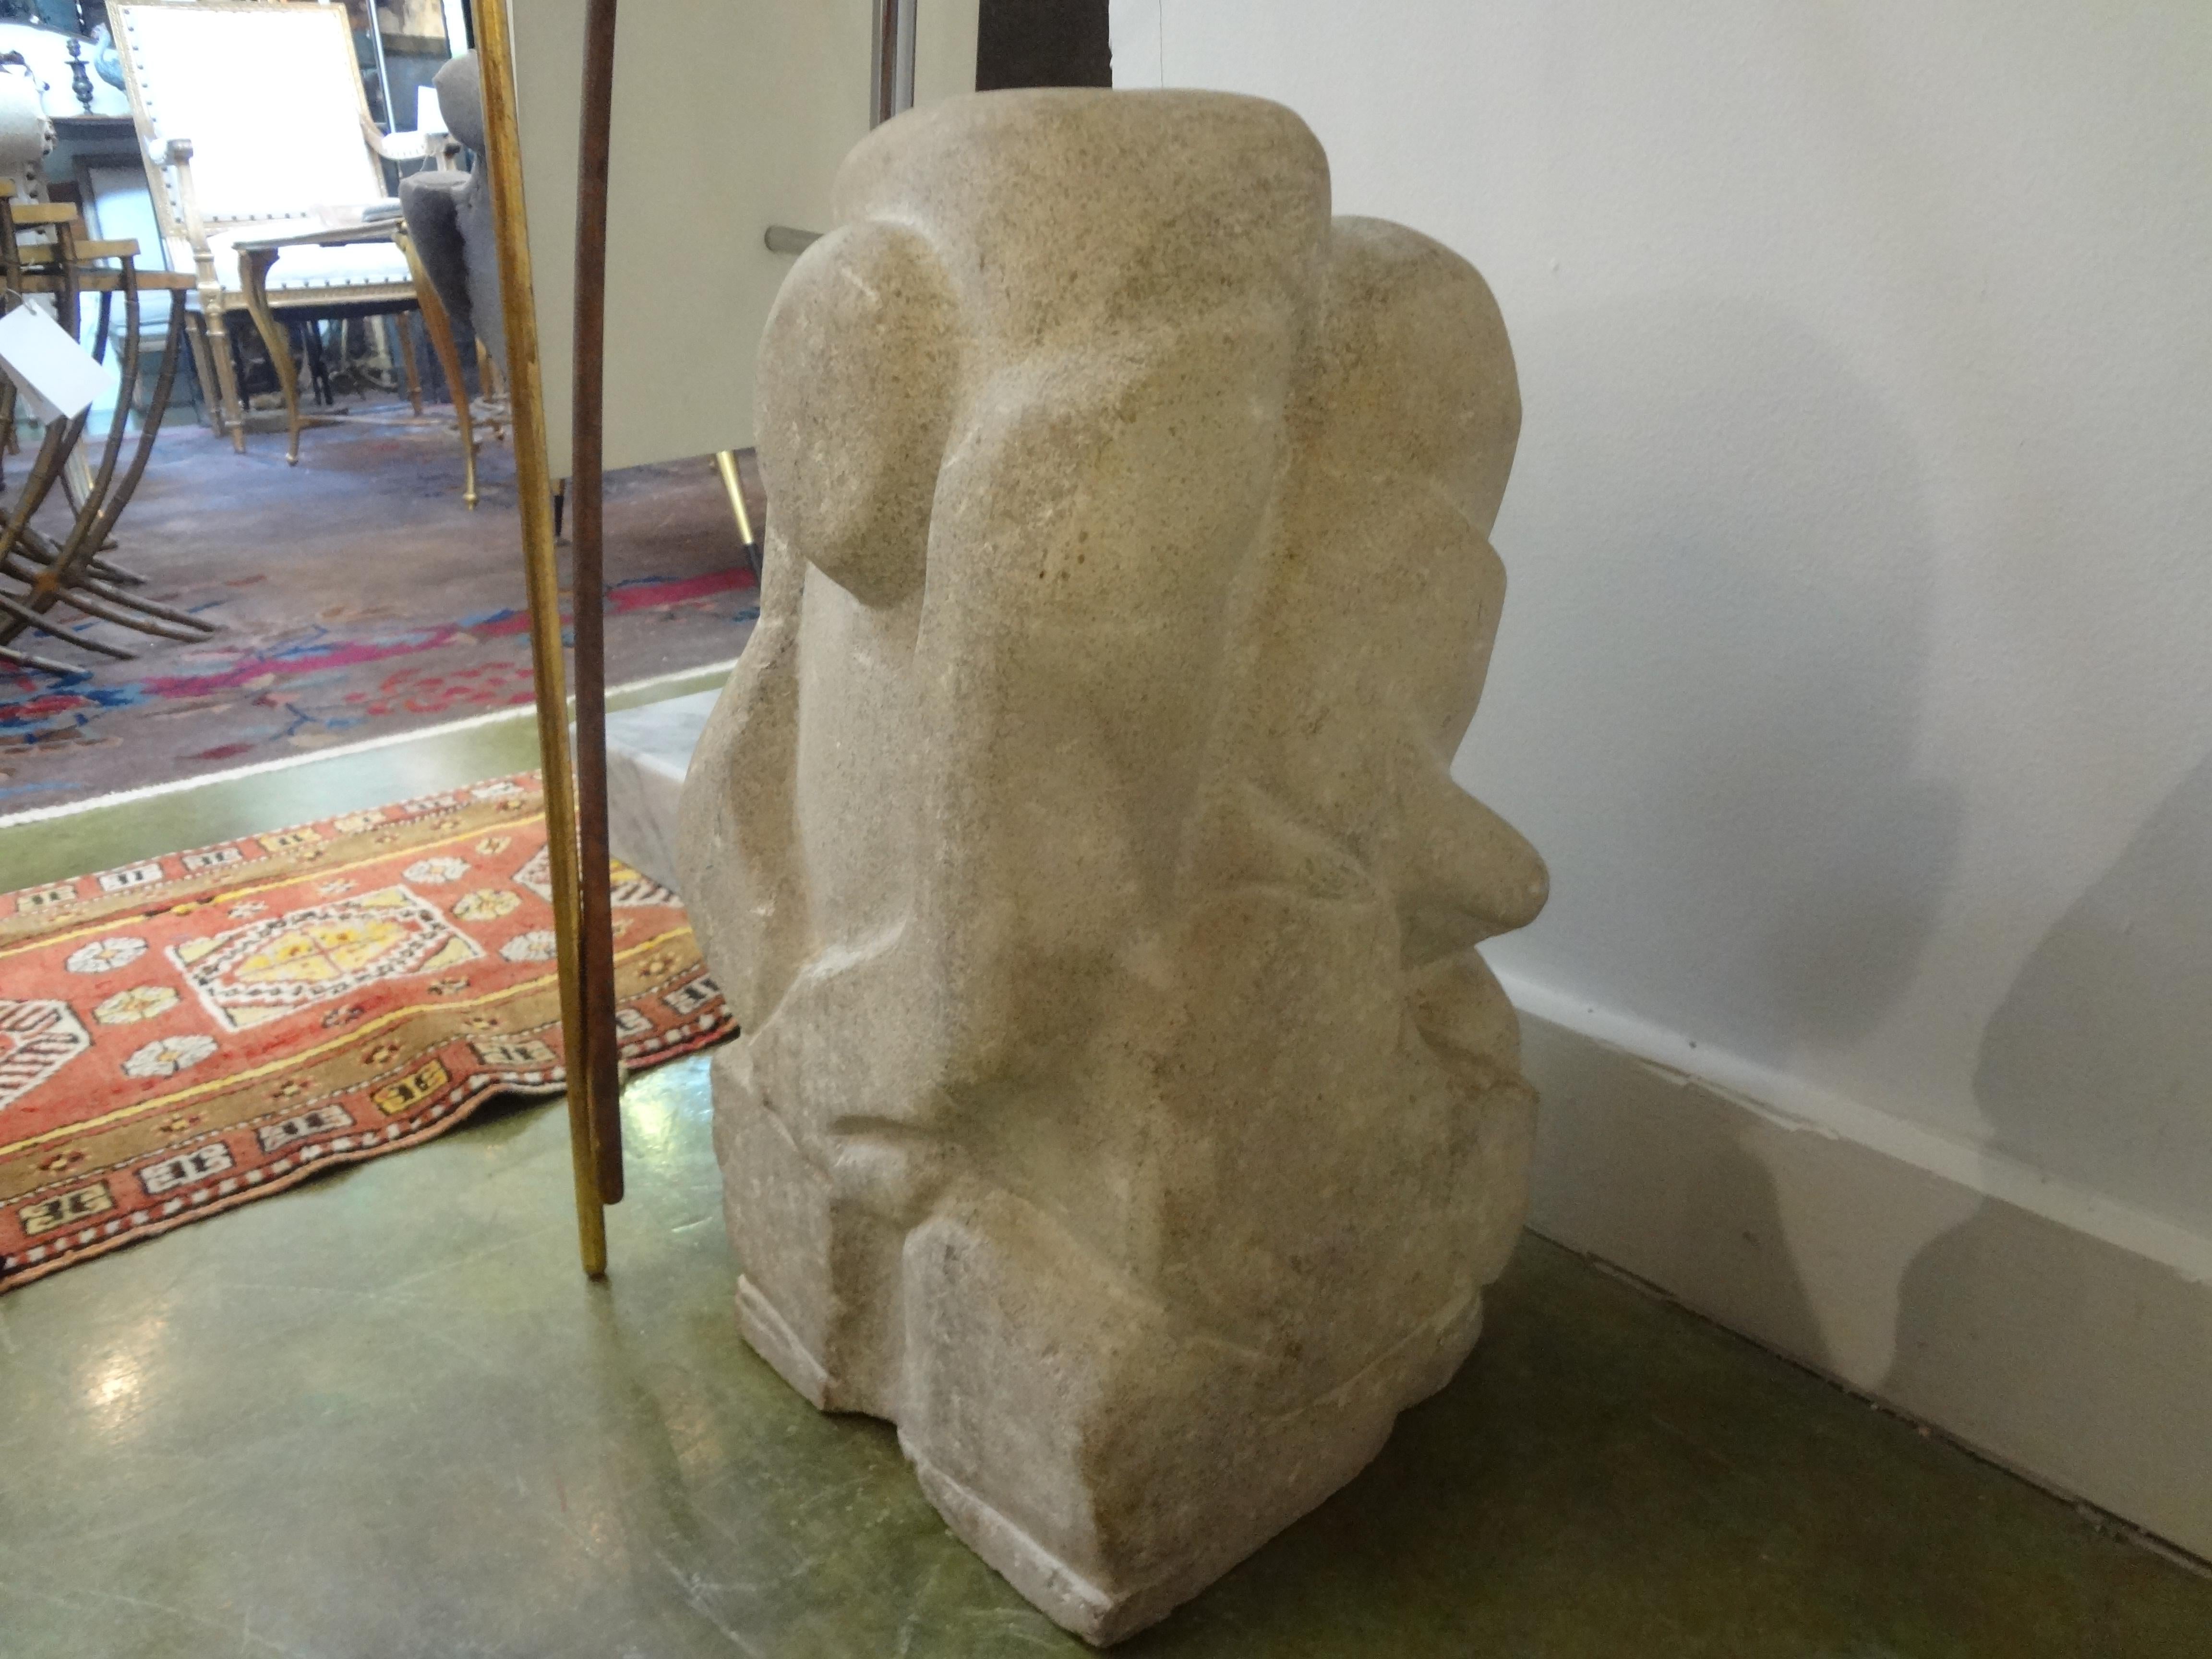 Mid-Century Modern abstract granite sculpture.
Well executed Mid-Century Modern granite abstract sculpture after Rene Brancusi. This fabulous stone sculpture has been carved on all sides and can be viewed and appreciated at every angle. Although